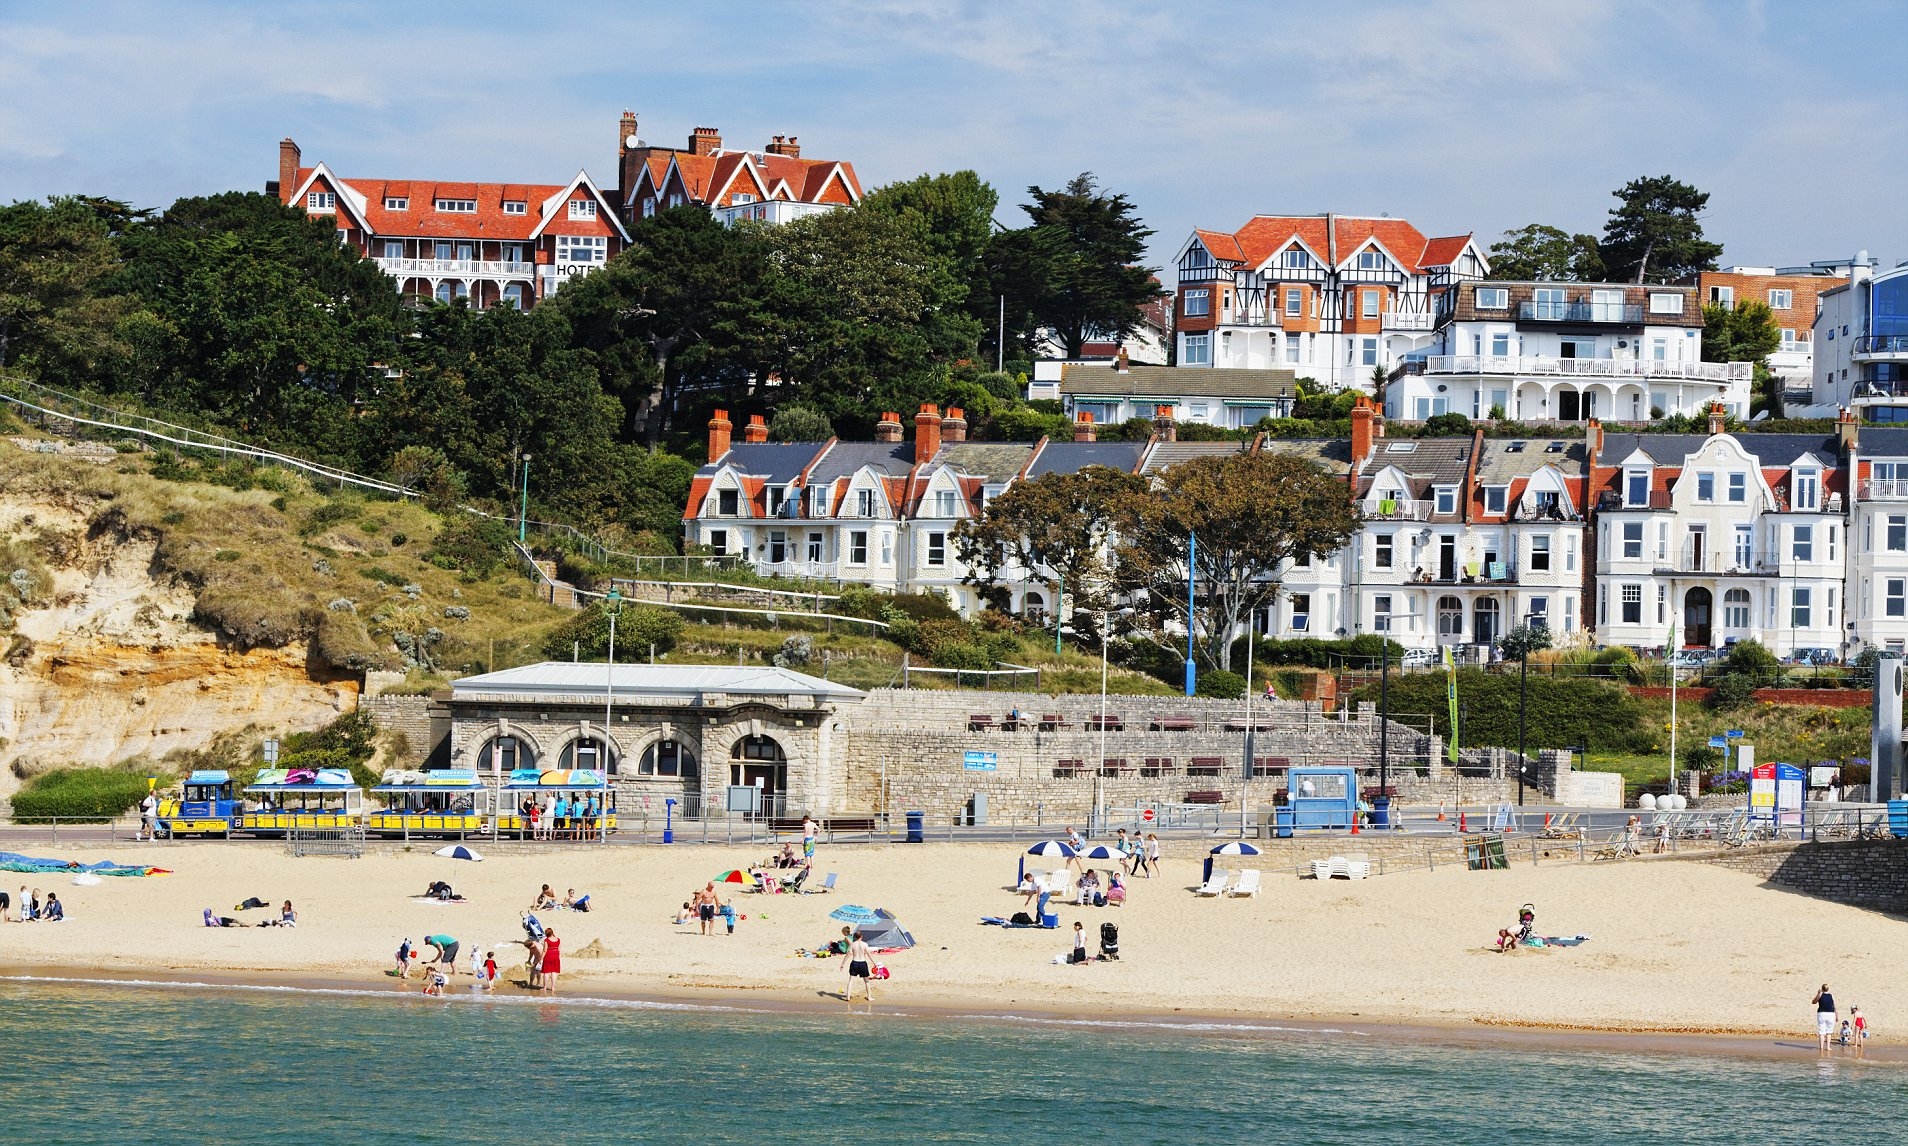 10 Most Beautiful Coastal Towns in the UK